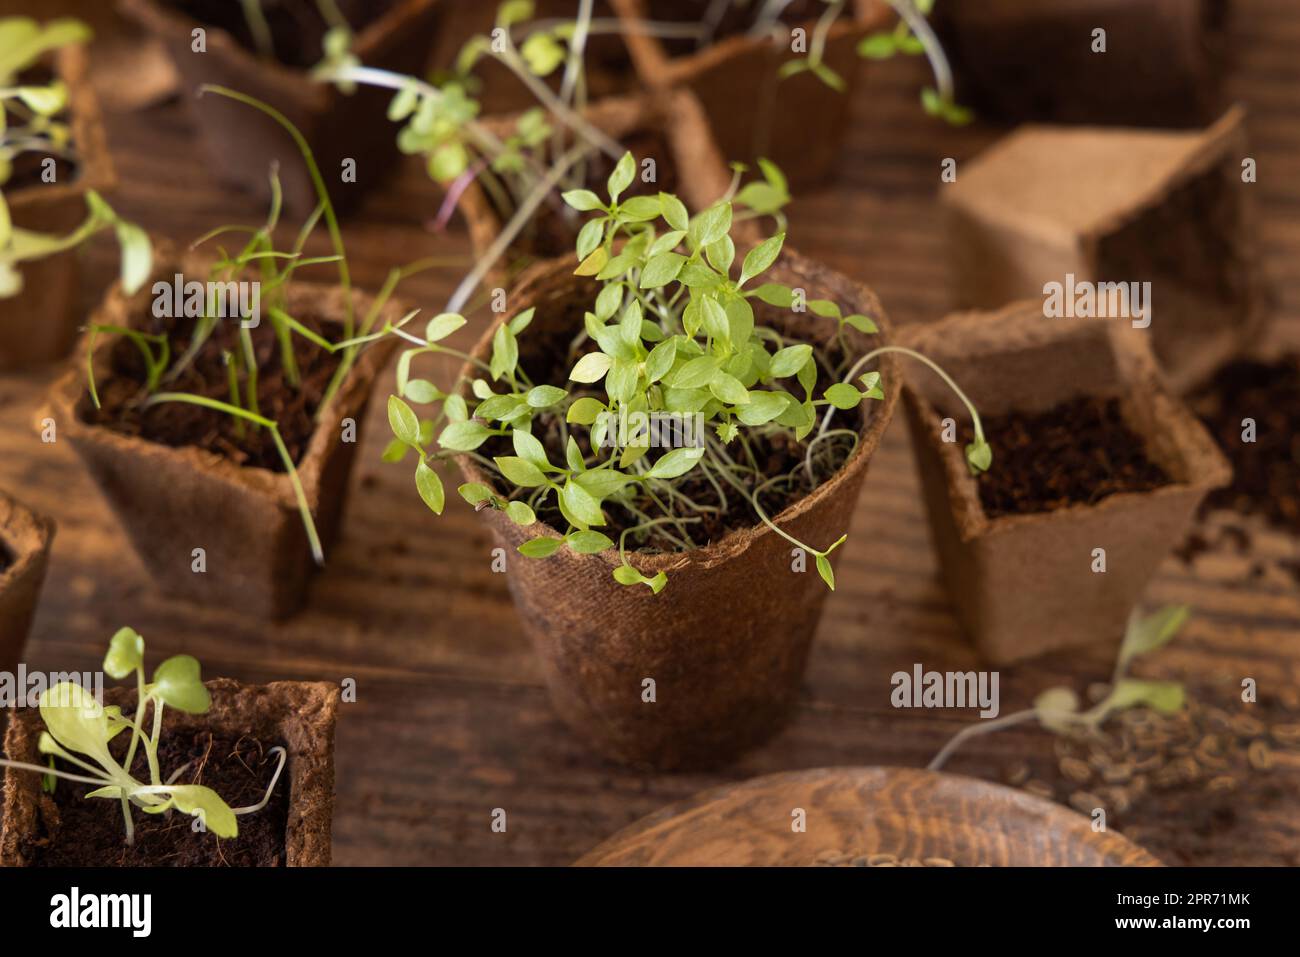 Vegetable seedlings in biodegradable pots on wooden table close up. Urban gardening Stock Photo